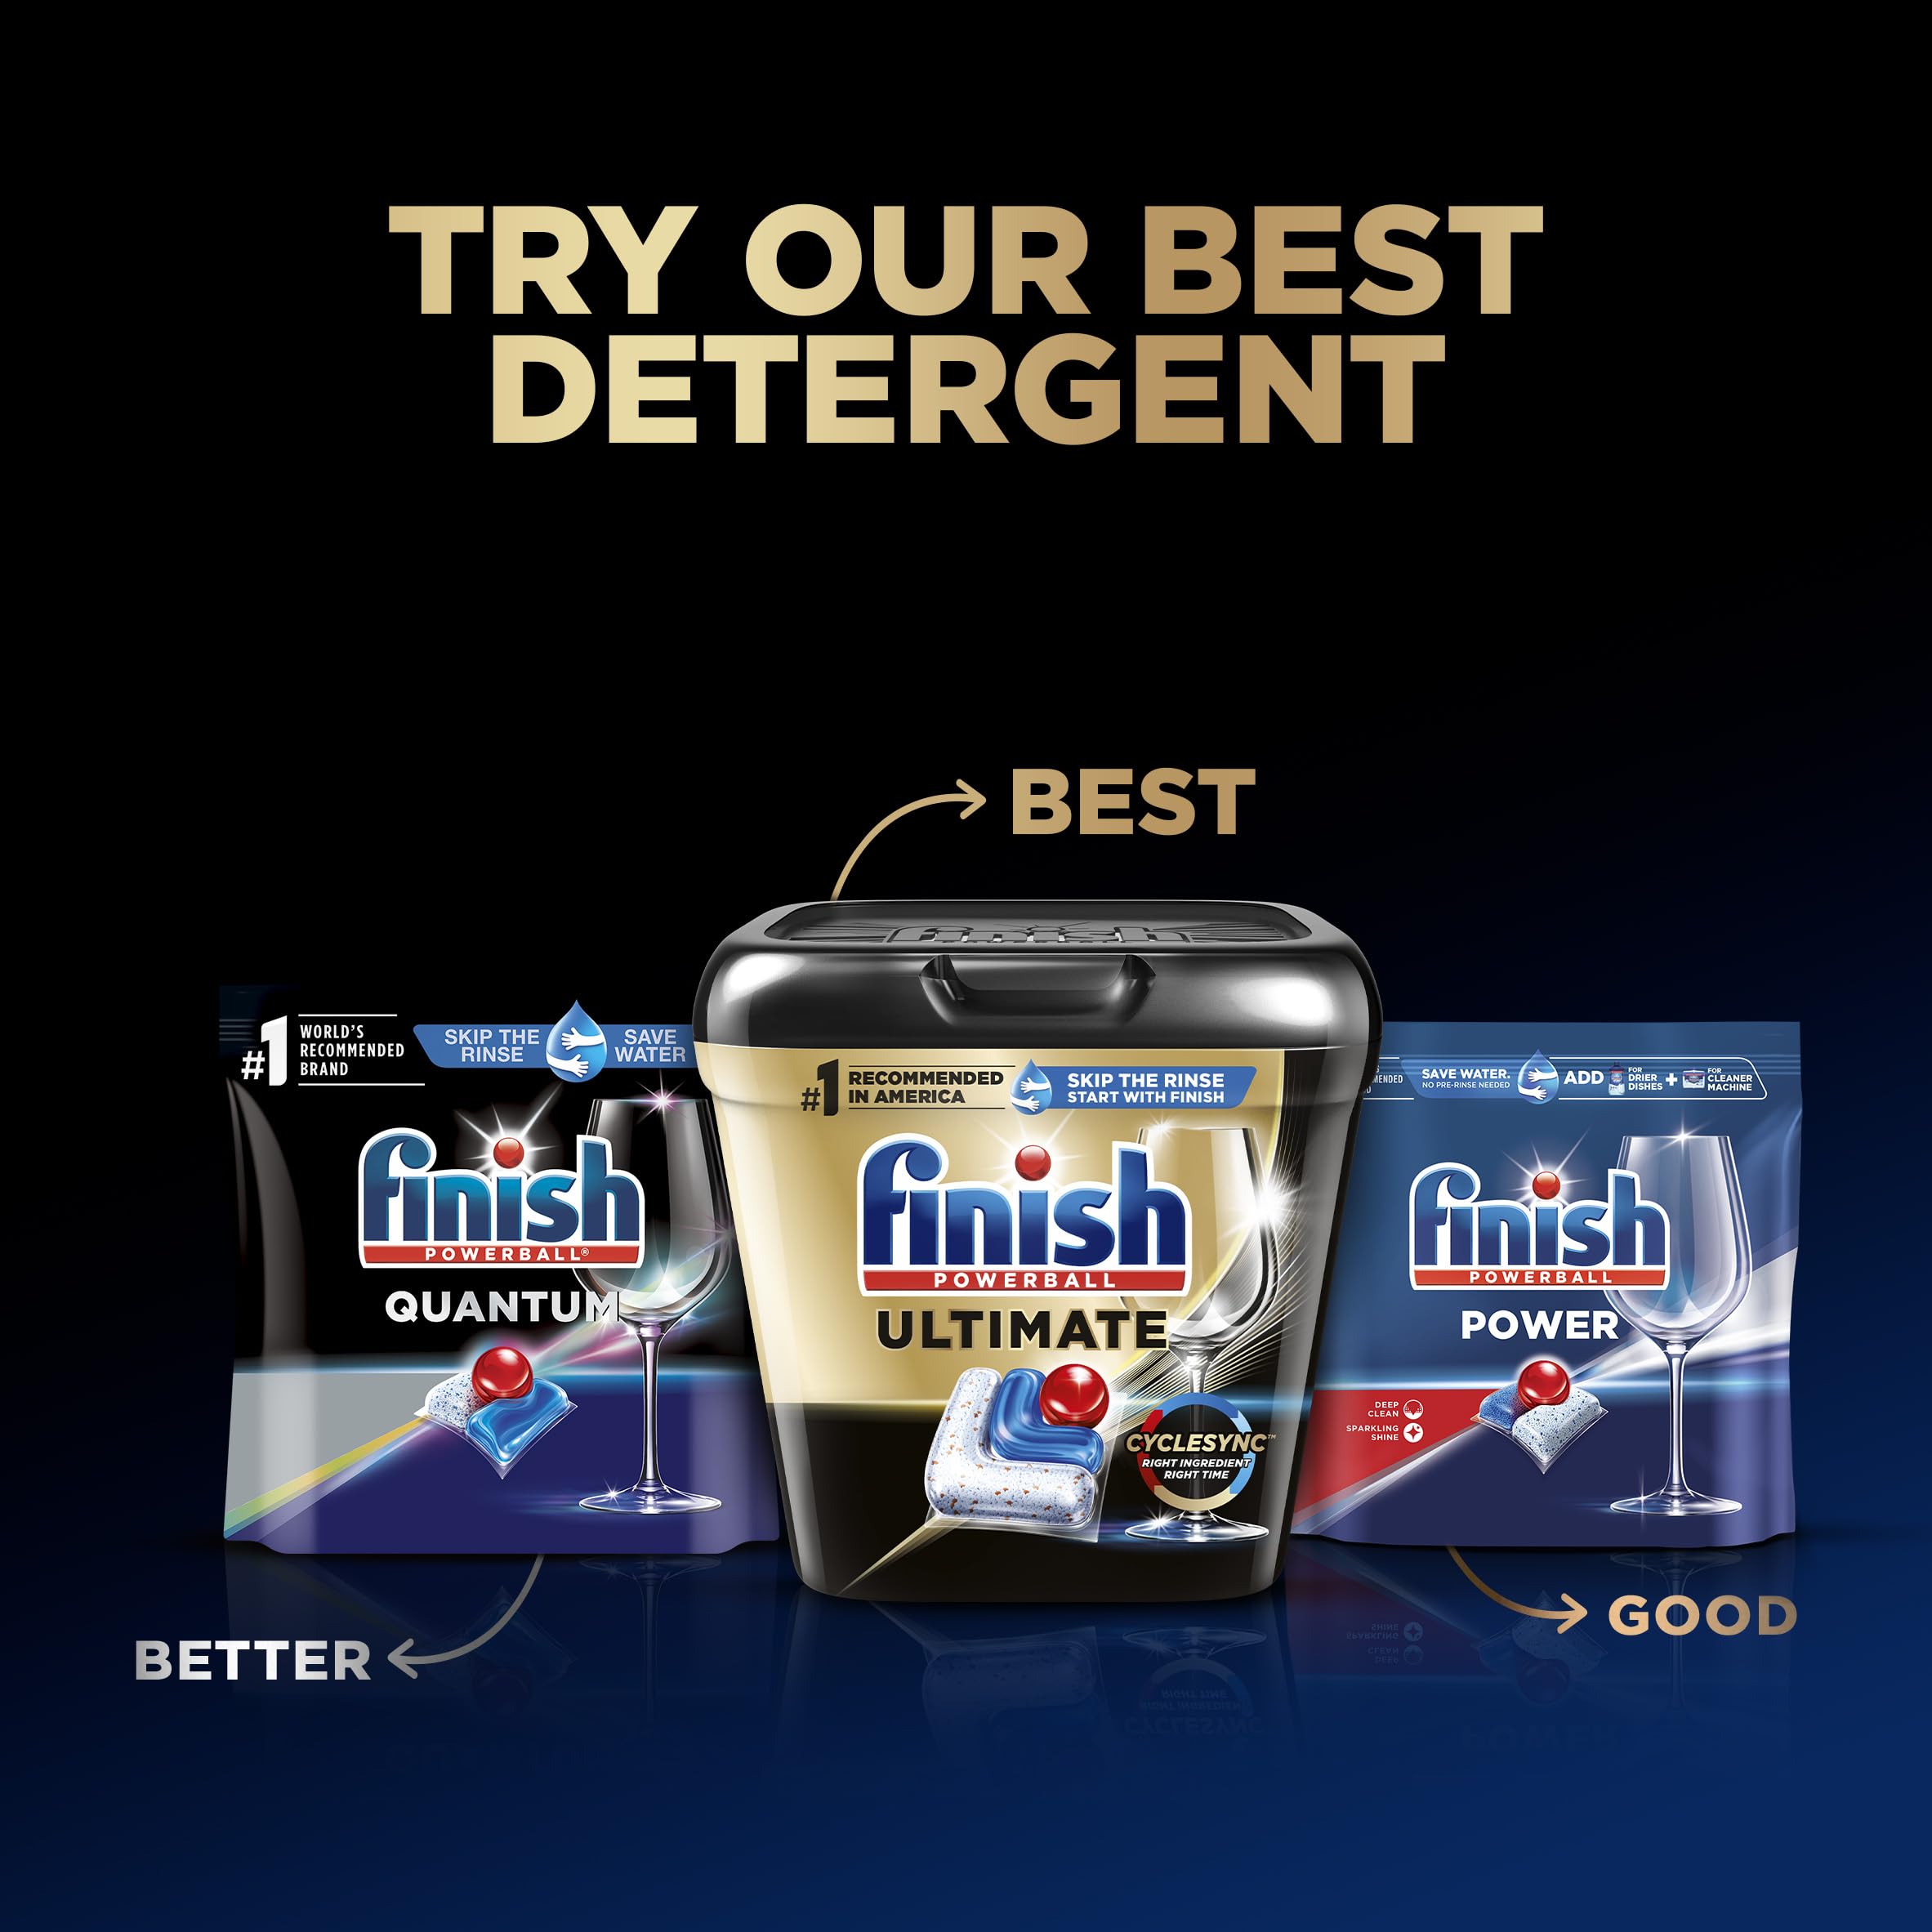 Finish Ultimate Dishwasher Detergent- 52 Count - With CycleSync Technology - Dishwashing Tablets - Dish Tabs